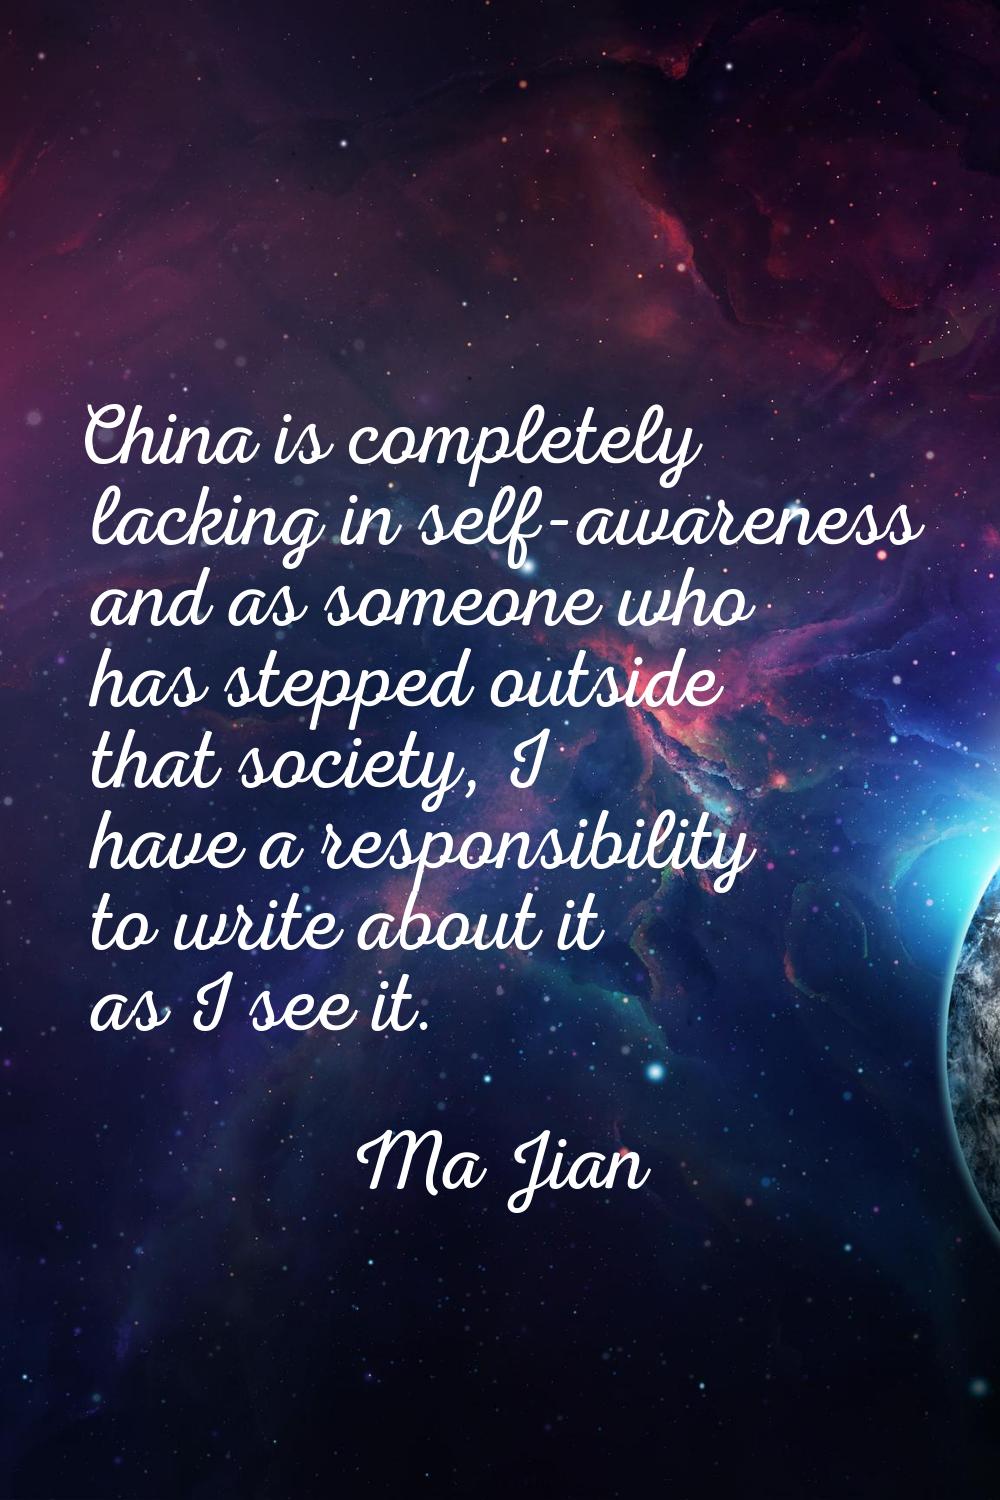 China is completely lacking in self-awareness and as someone who has stepped outside that society, 